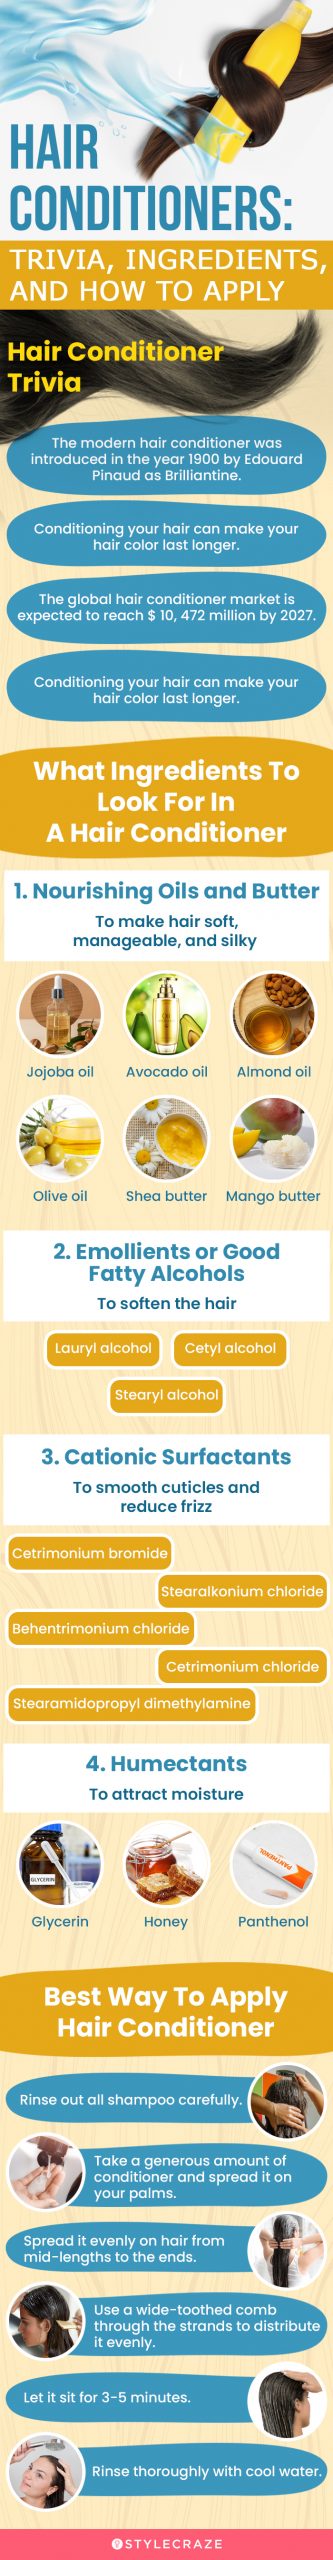  Best Way To Apply Hair Conditioner [infographic]